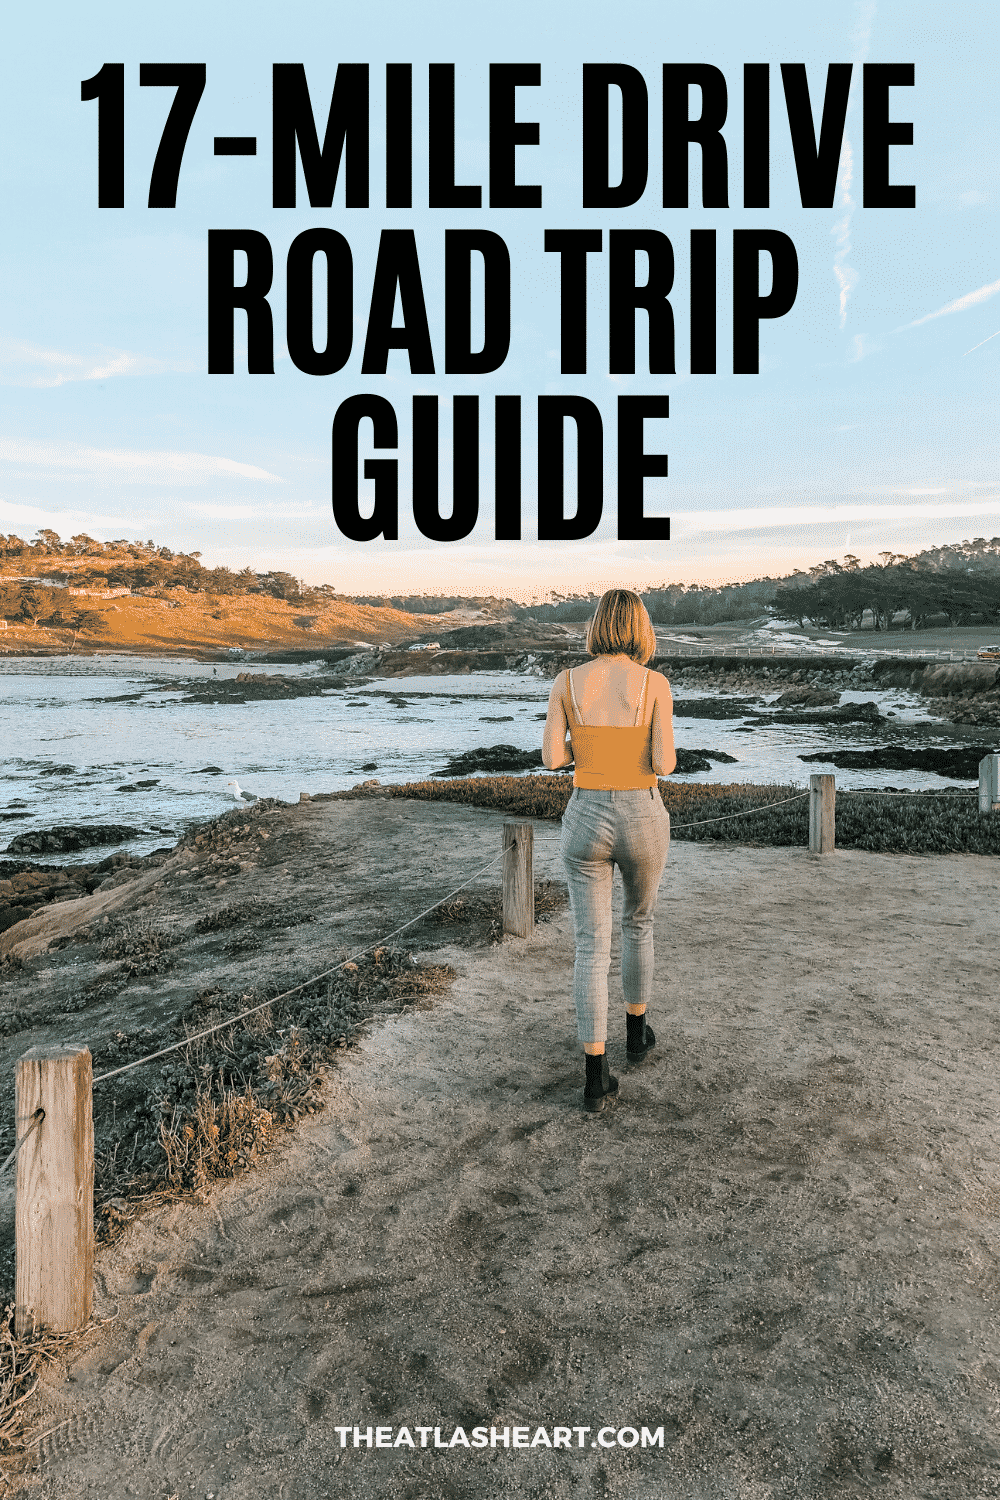 17-Mile Drive Road Trip Guide: How to Make the Most of Your Trip